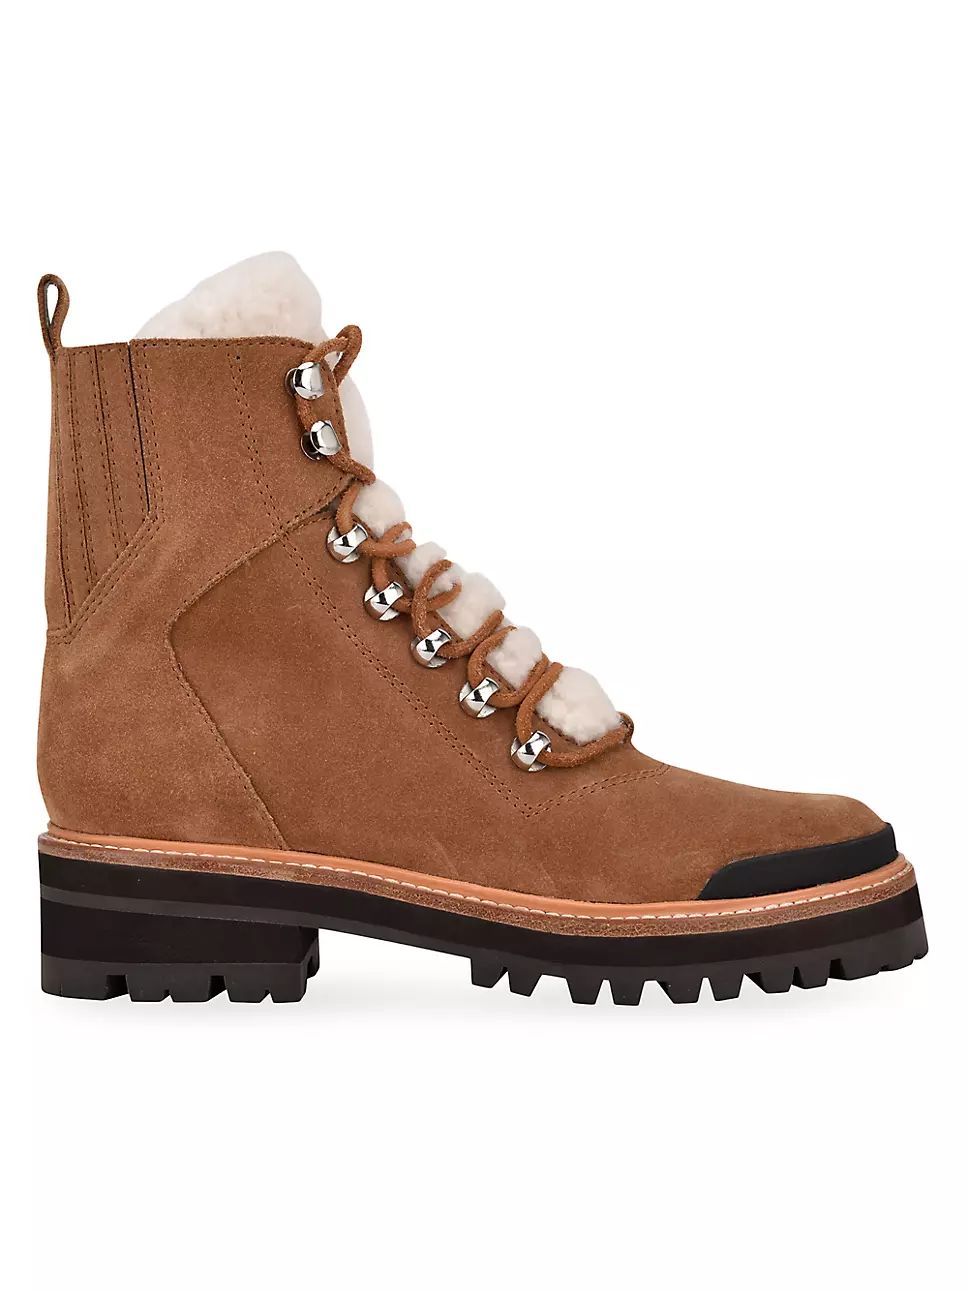 Marc Fisher LTD Izzie Shearling-Lined Suede Work Boots | Saks Fifth Avenue